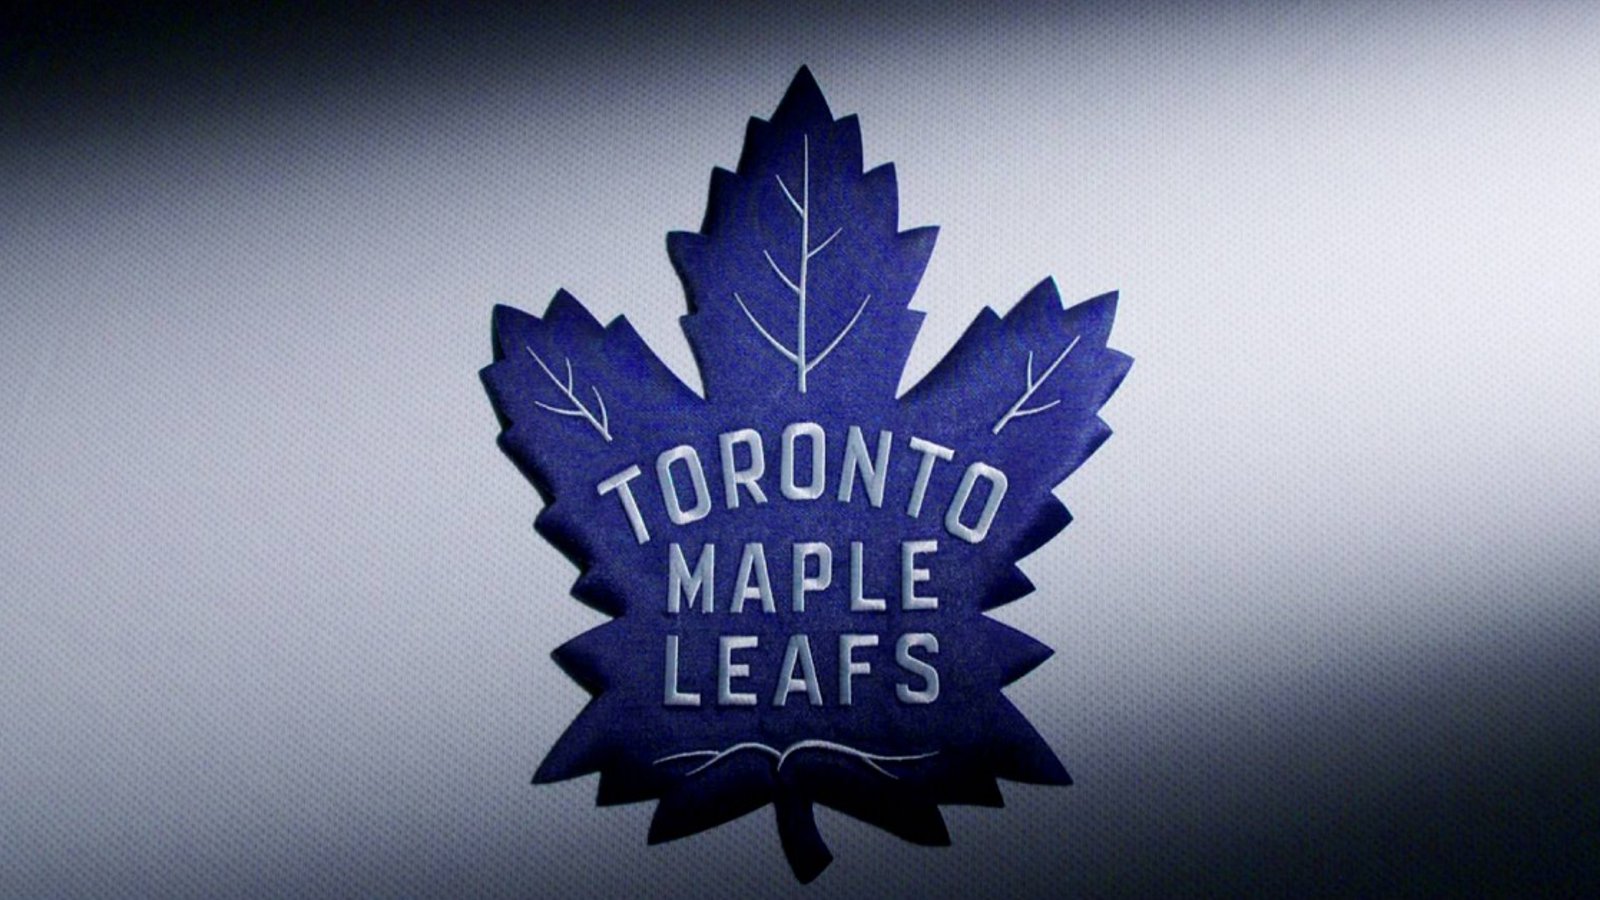 Maple Leafs forward placed on long term injured reserve.